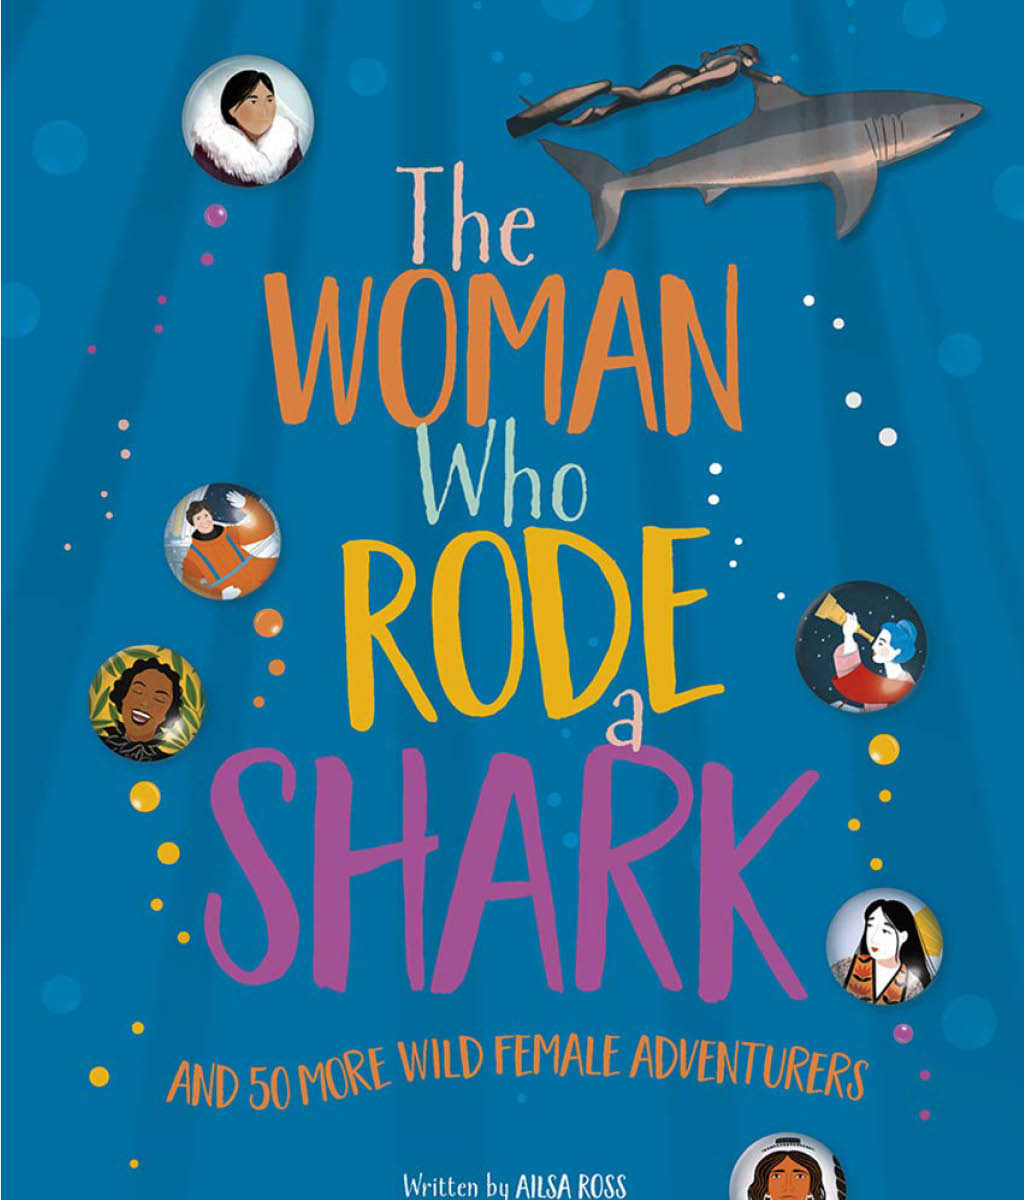 The Woman Who Rode a Shark: and 50 more wild female adventures by Ailsa Ross